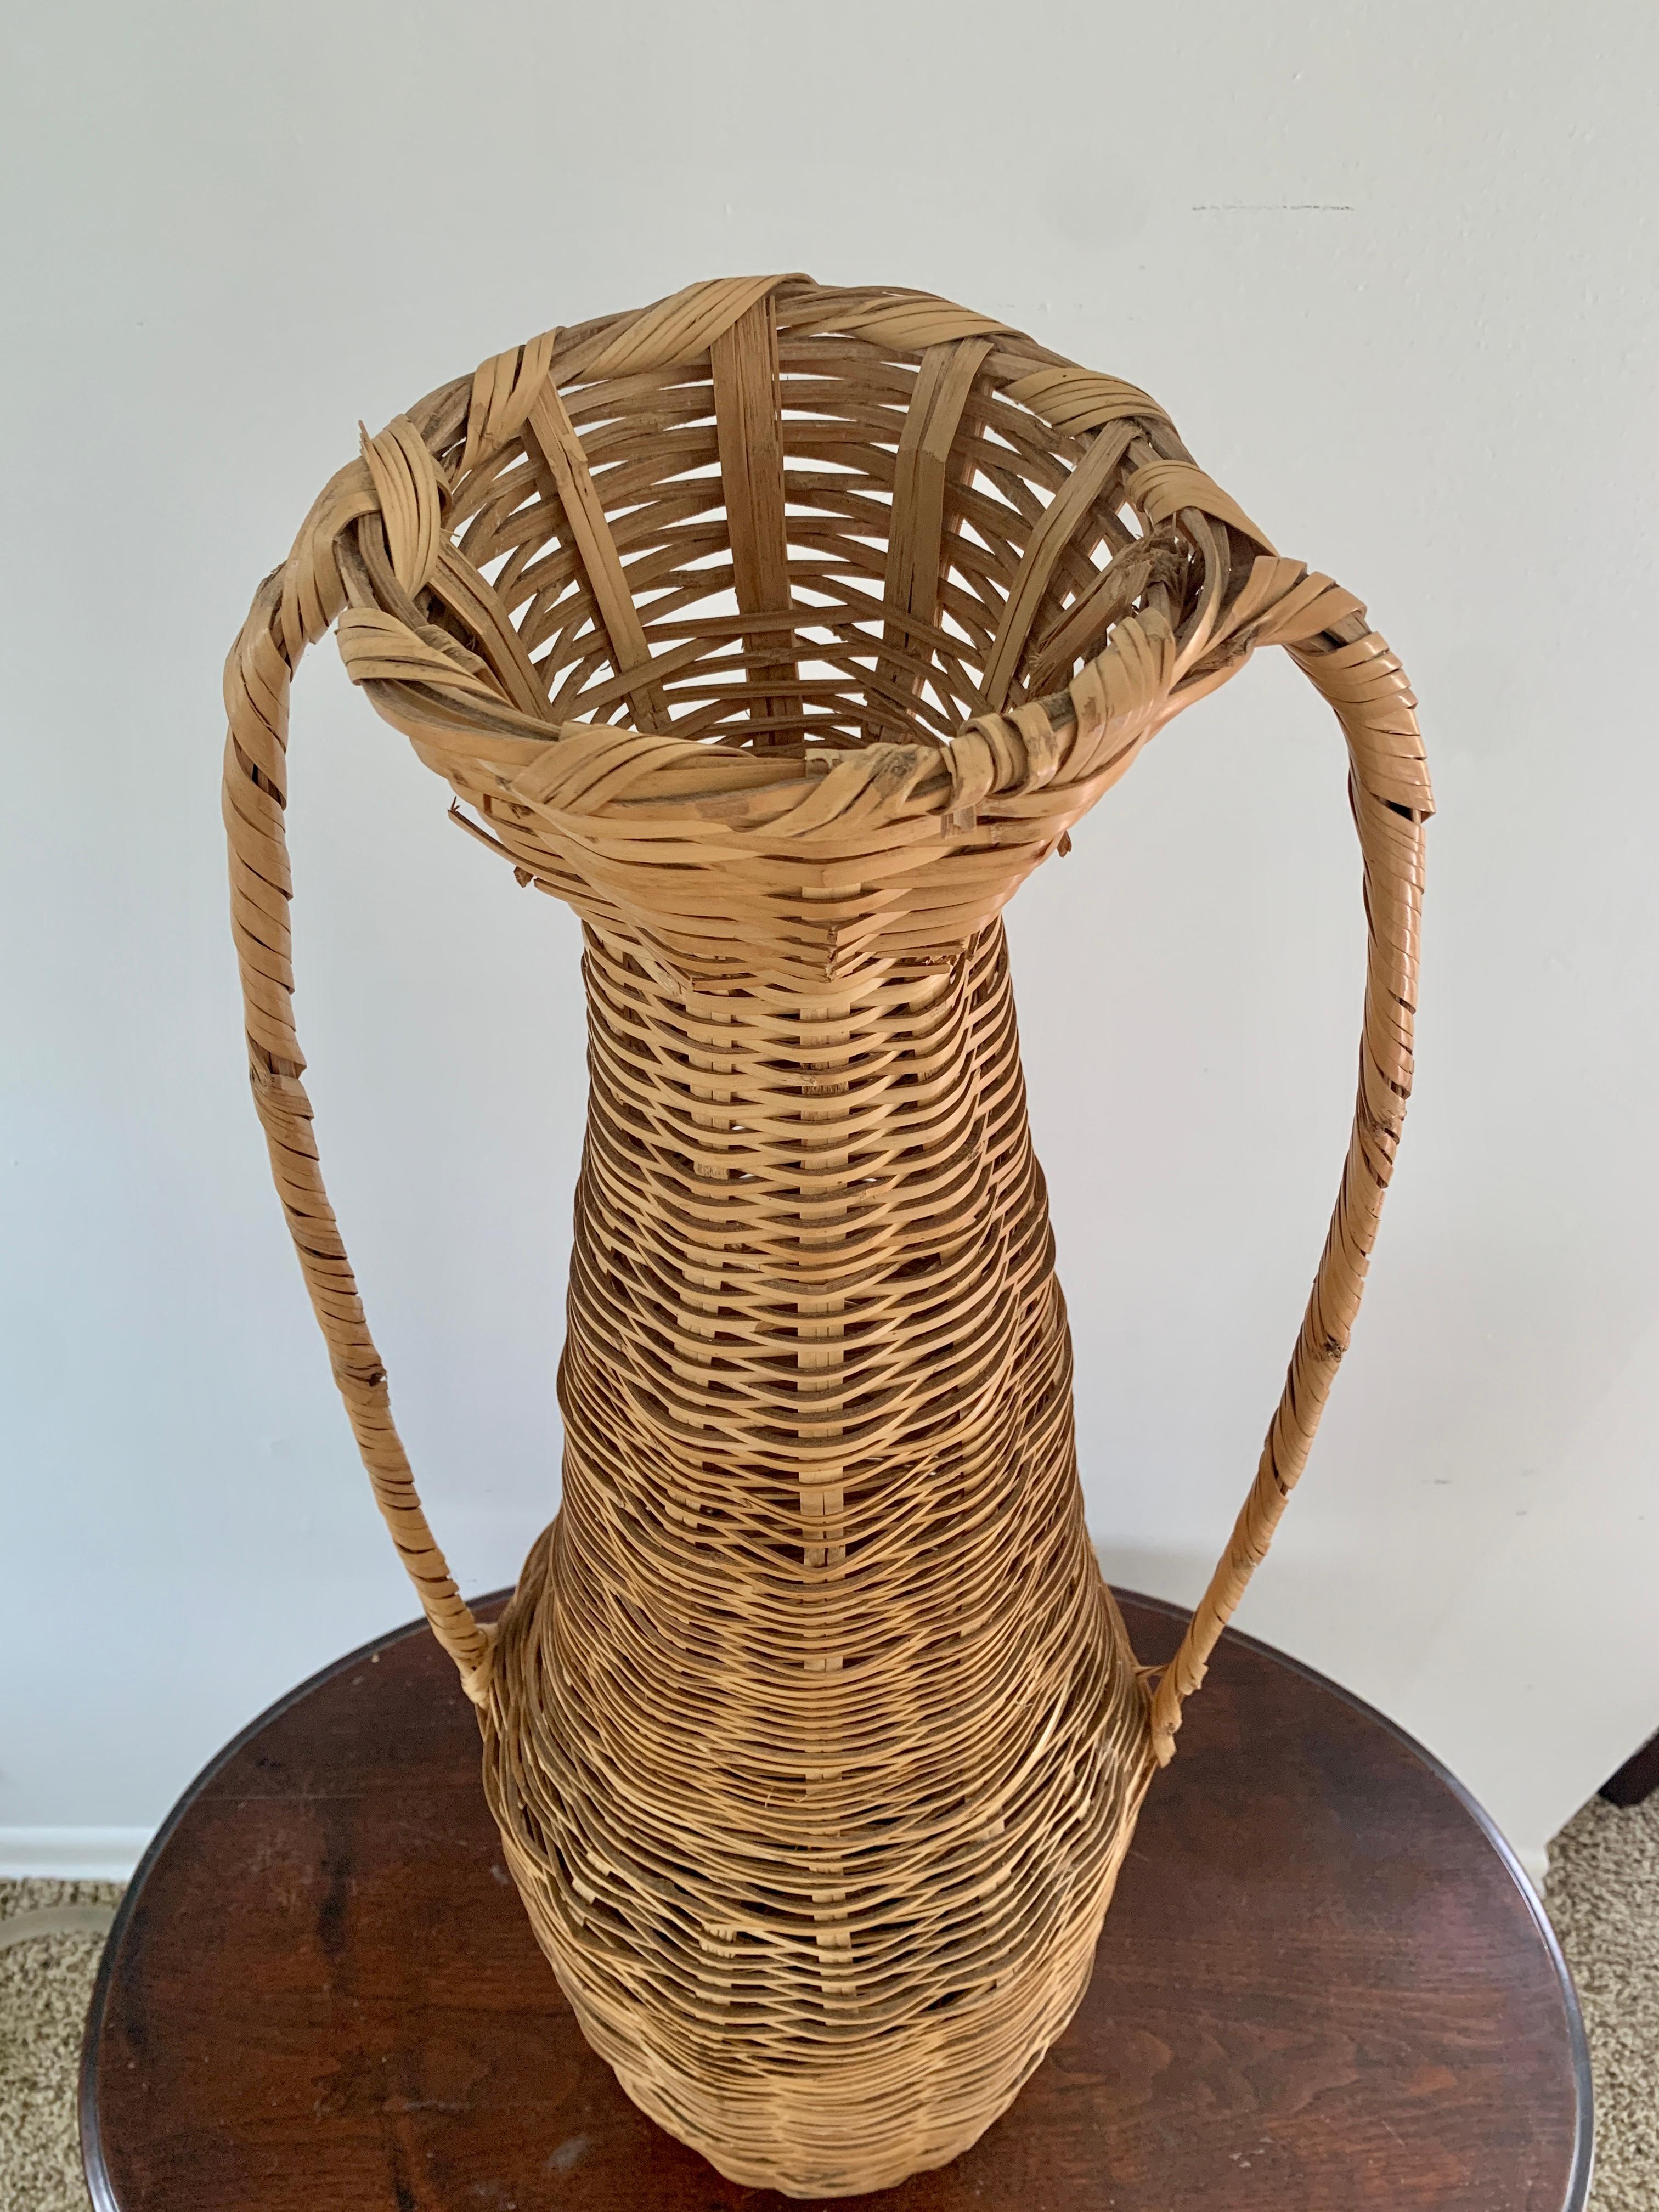 A charming Boho Chic woven wicker floor basket vase with two handles

USA, circa 1980s

Measures: 12